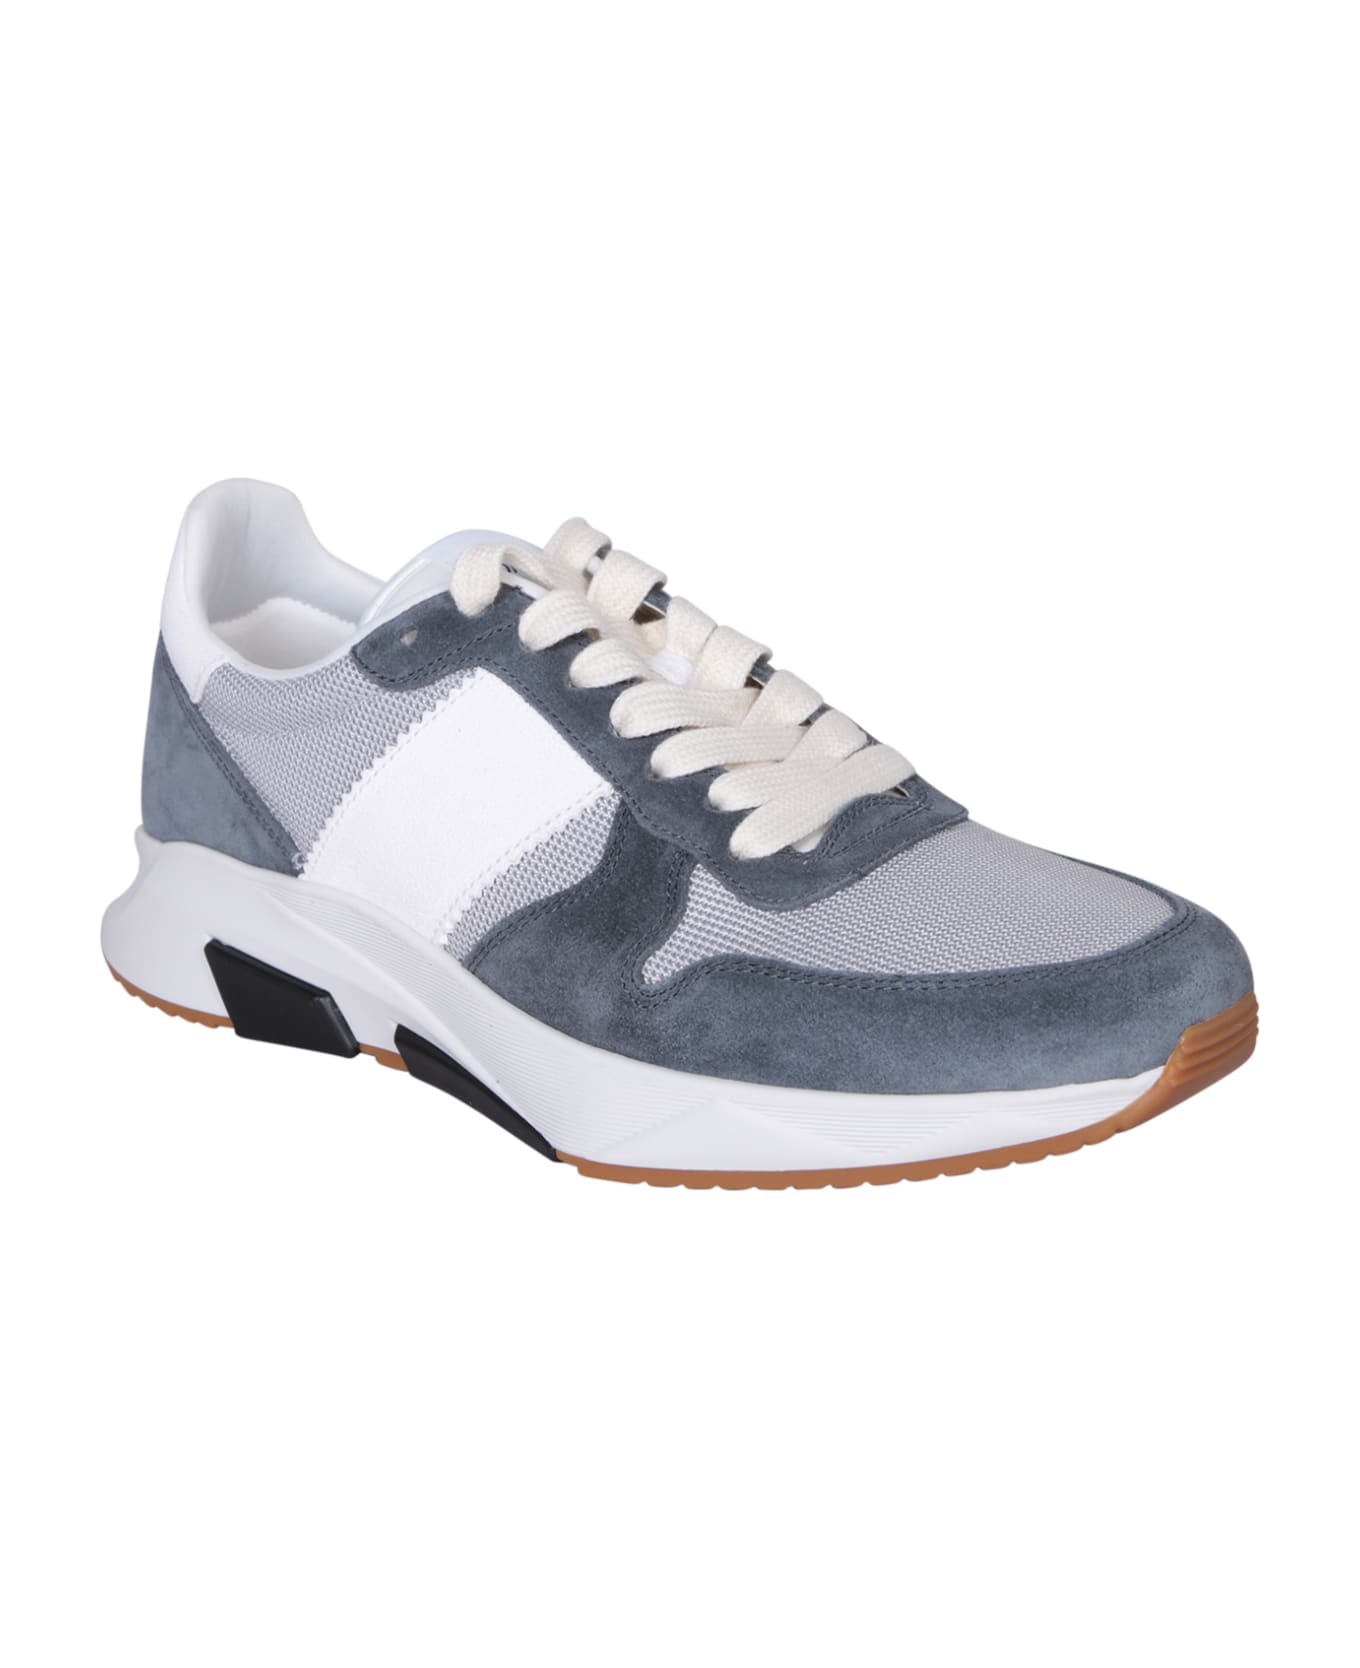 Tom Ford Yagga White Sneakers - Blue